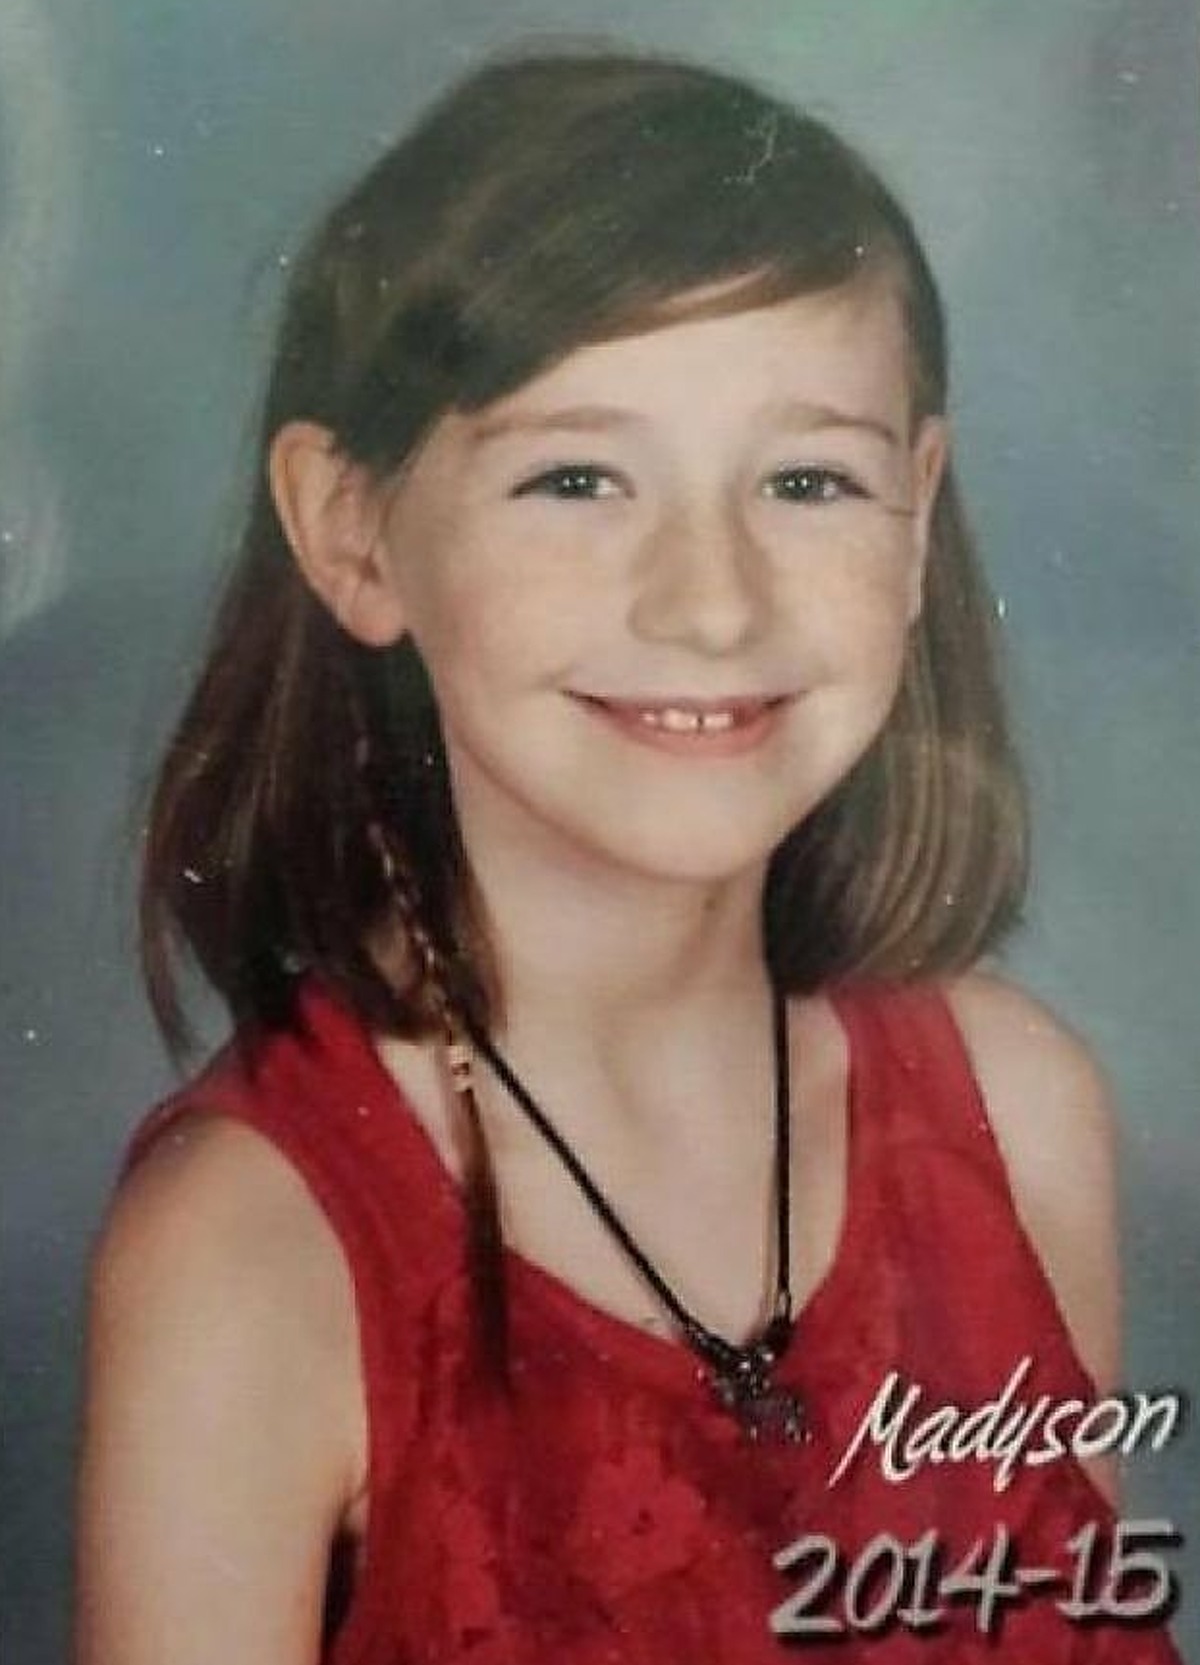 Madyson Middleton, 8, was found dead in Santa Cruz on Monday, July 17, 2015. Neighbor Adrian Jerry Gonzalez, 15, was been charged with murder, kidnapping and sexual assault as an adult.